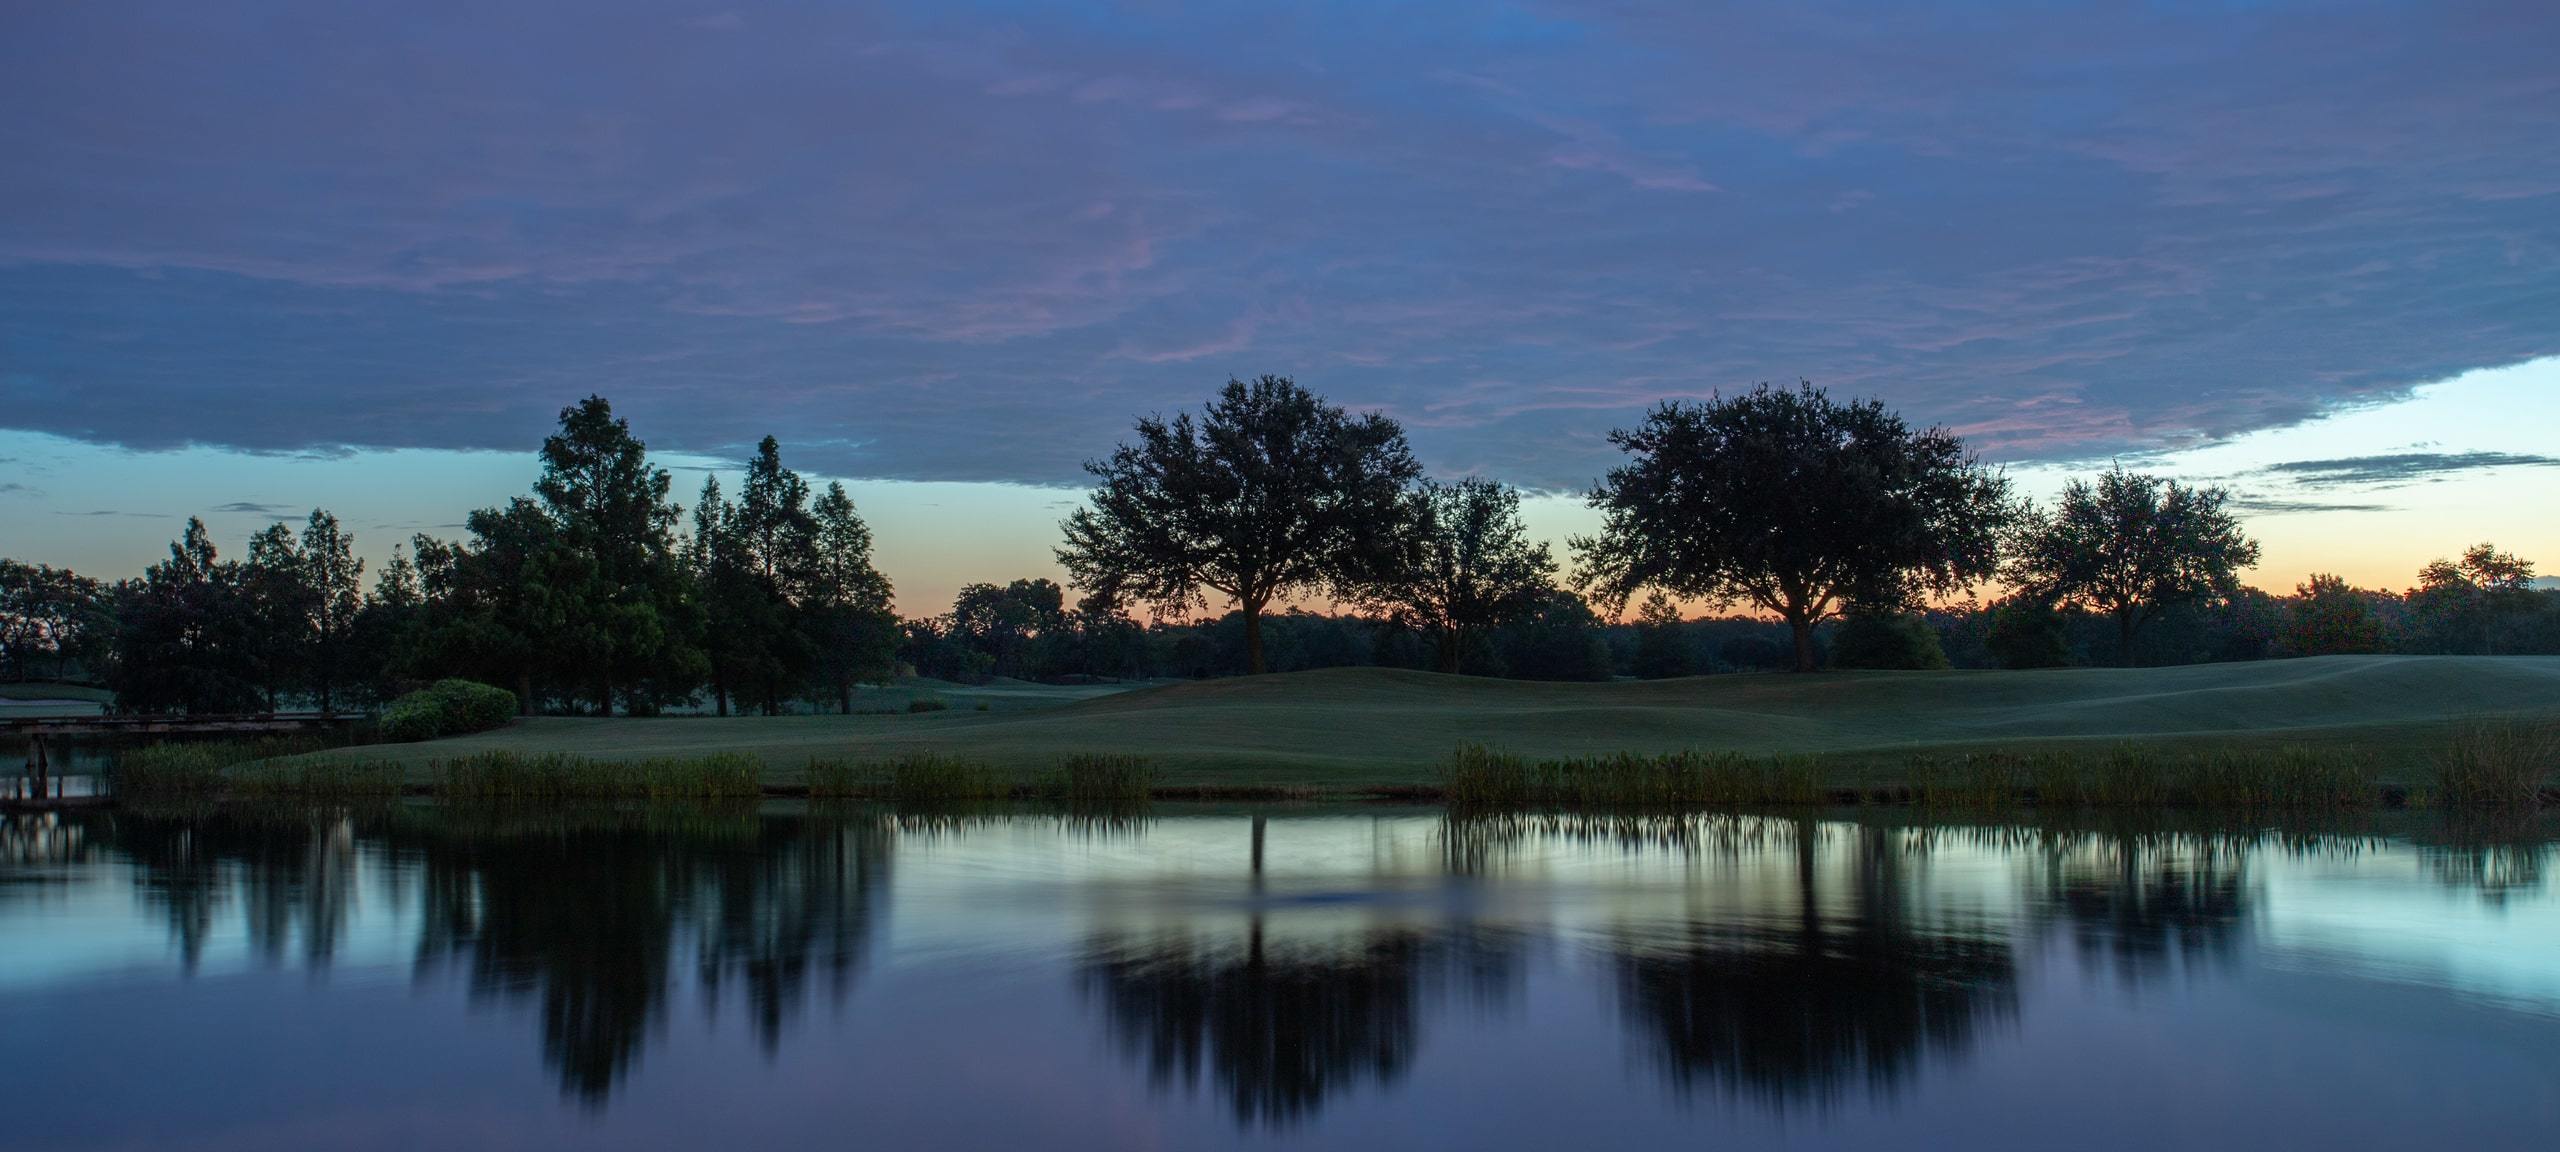 Blue sunset over golf course with lake reflections, typical of Bay Hill